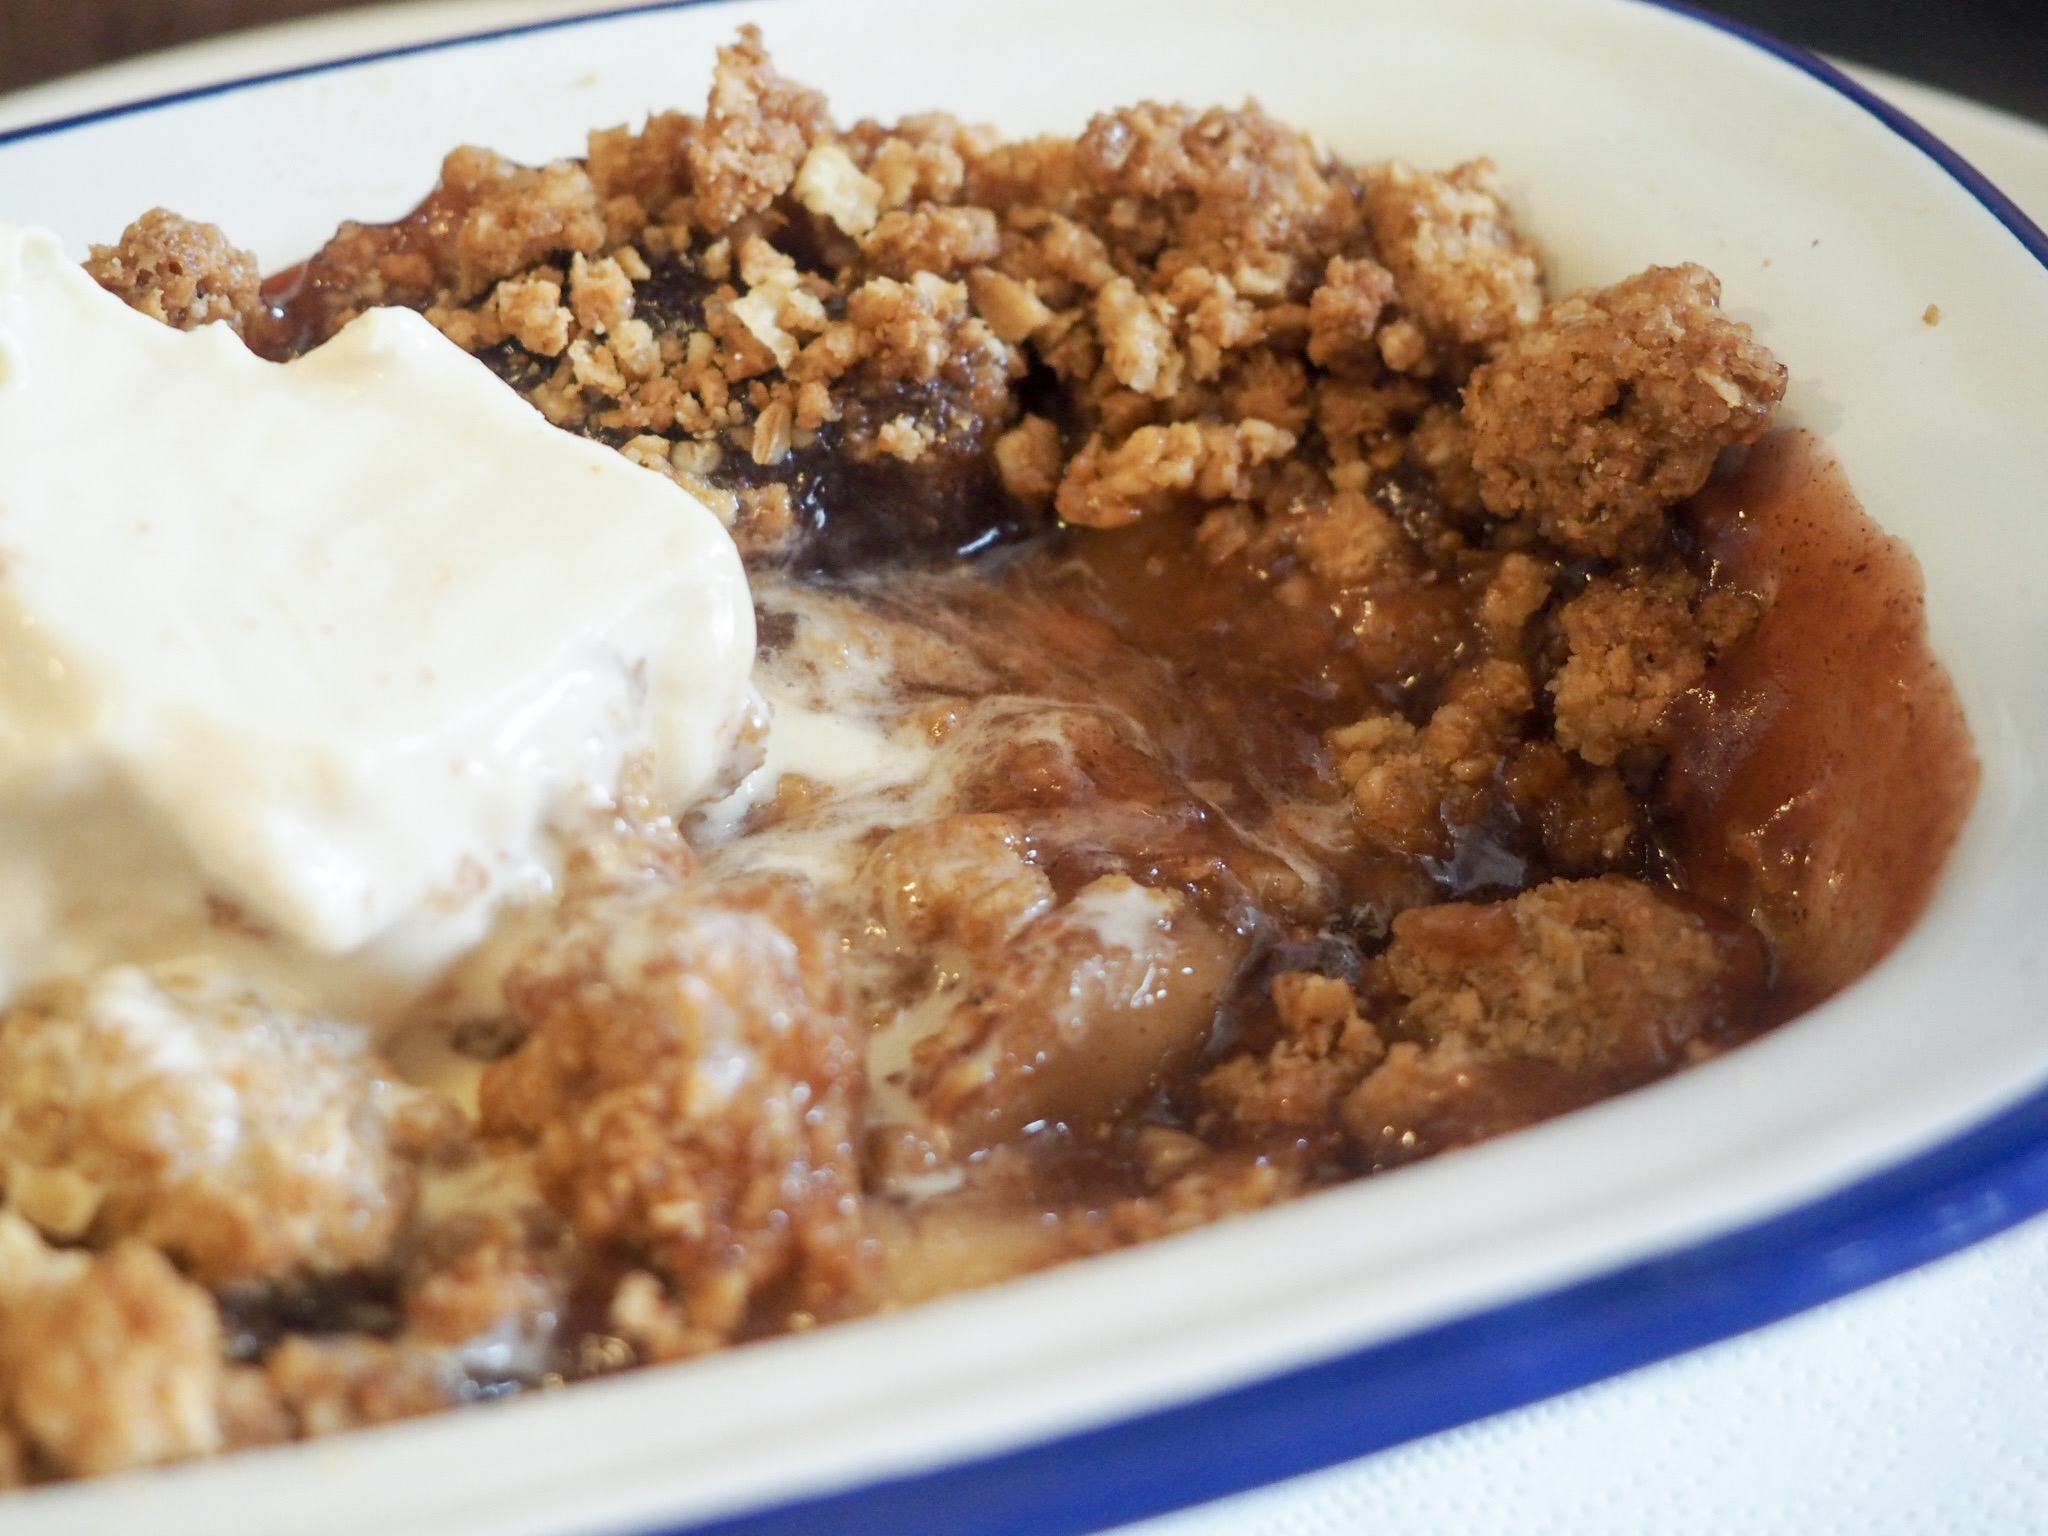 Plum and apple crumble